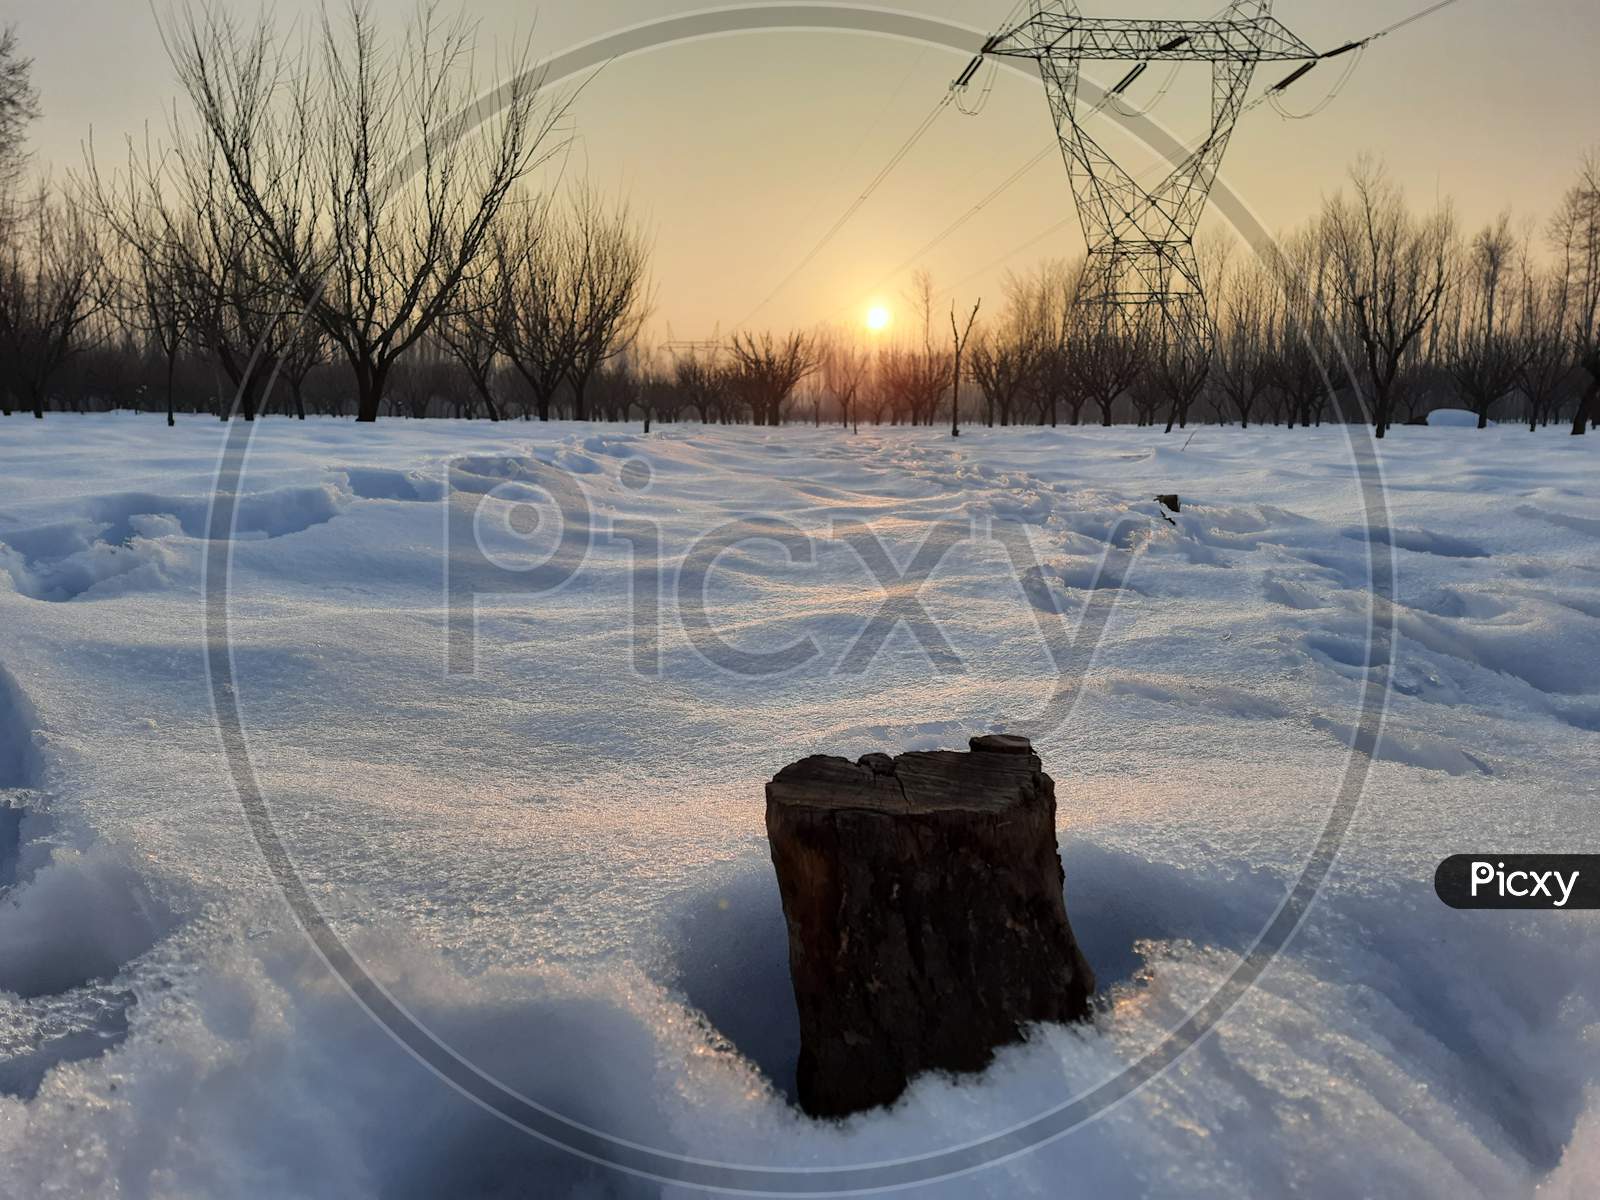 A rebounding view of stem of plum tree amid of snow covered field and backed sunset view in Kashmir.